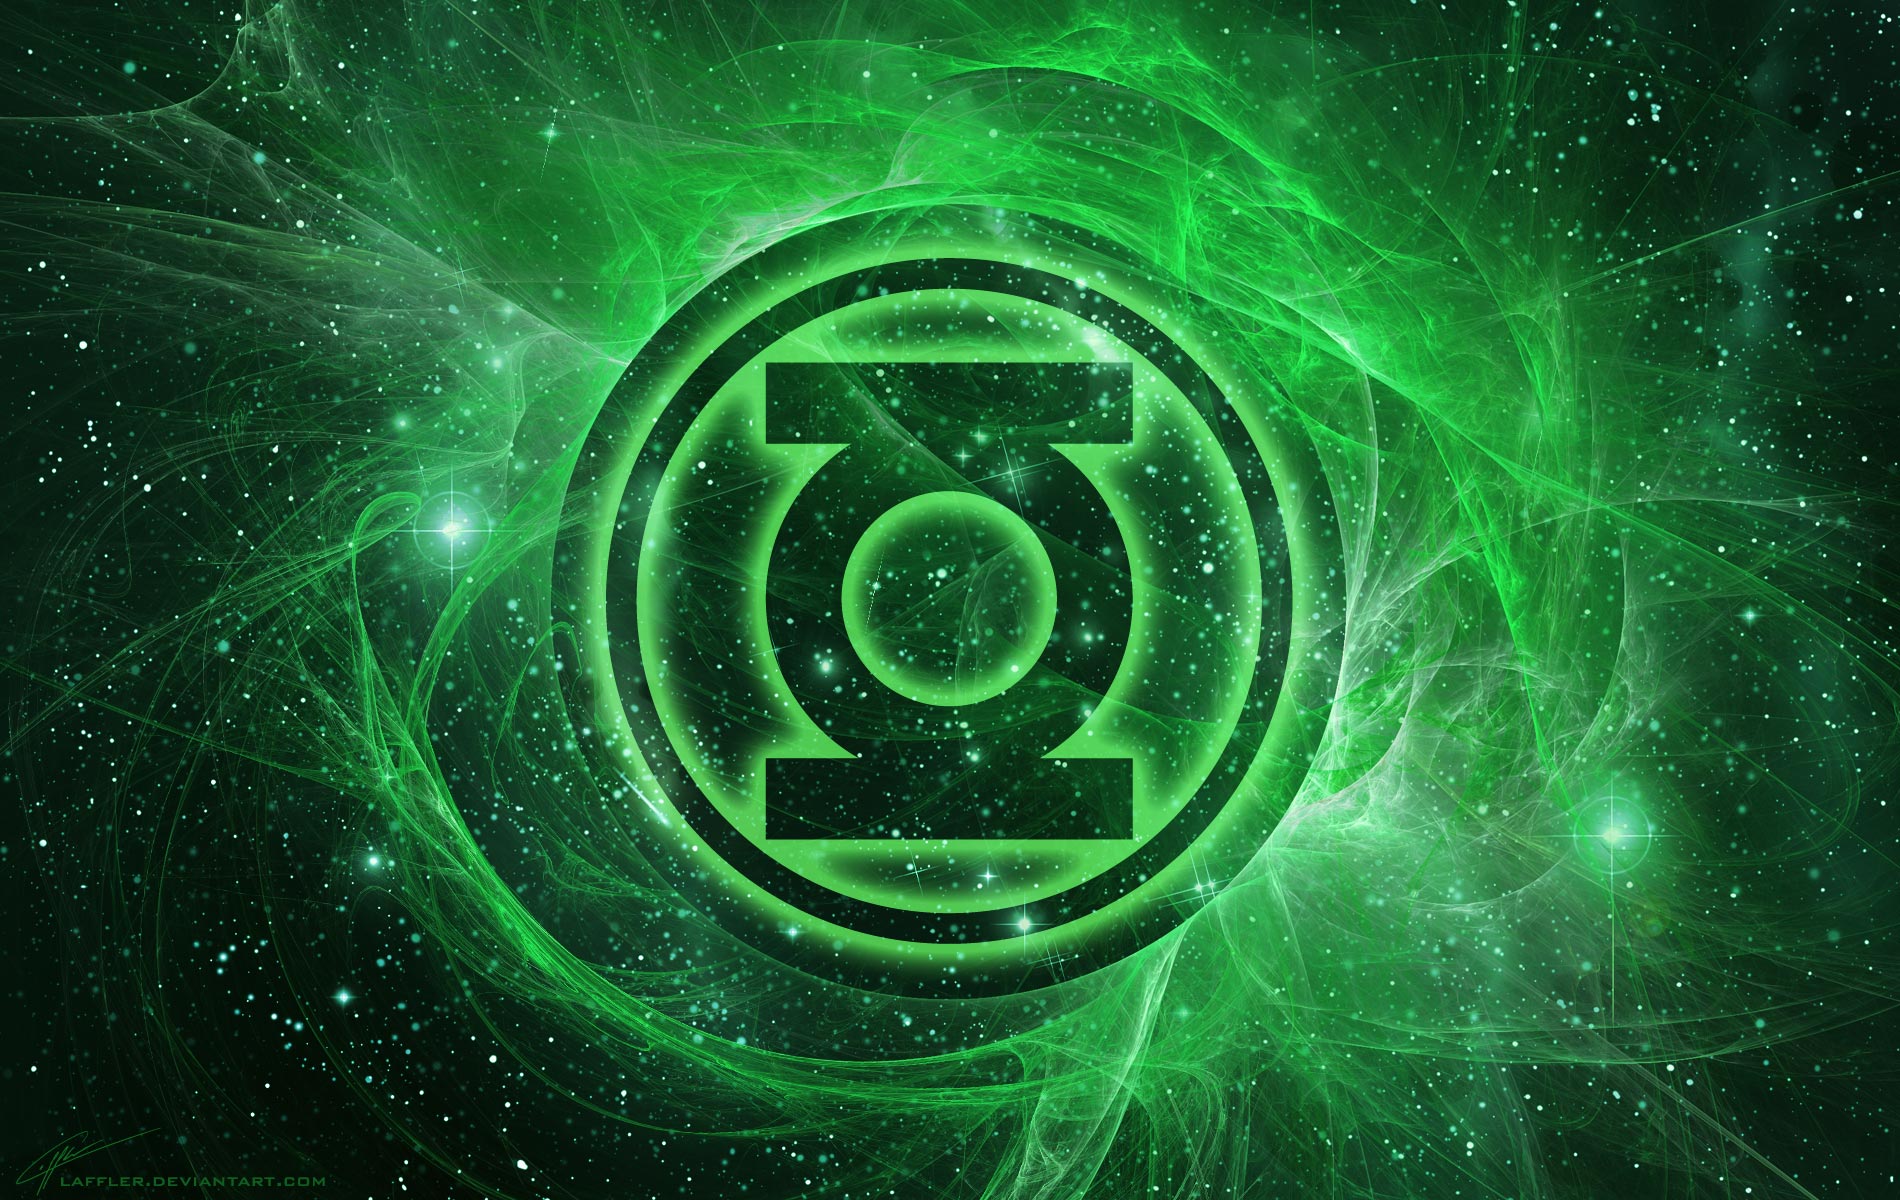 Red Lantern Corps Wallpapers